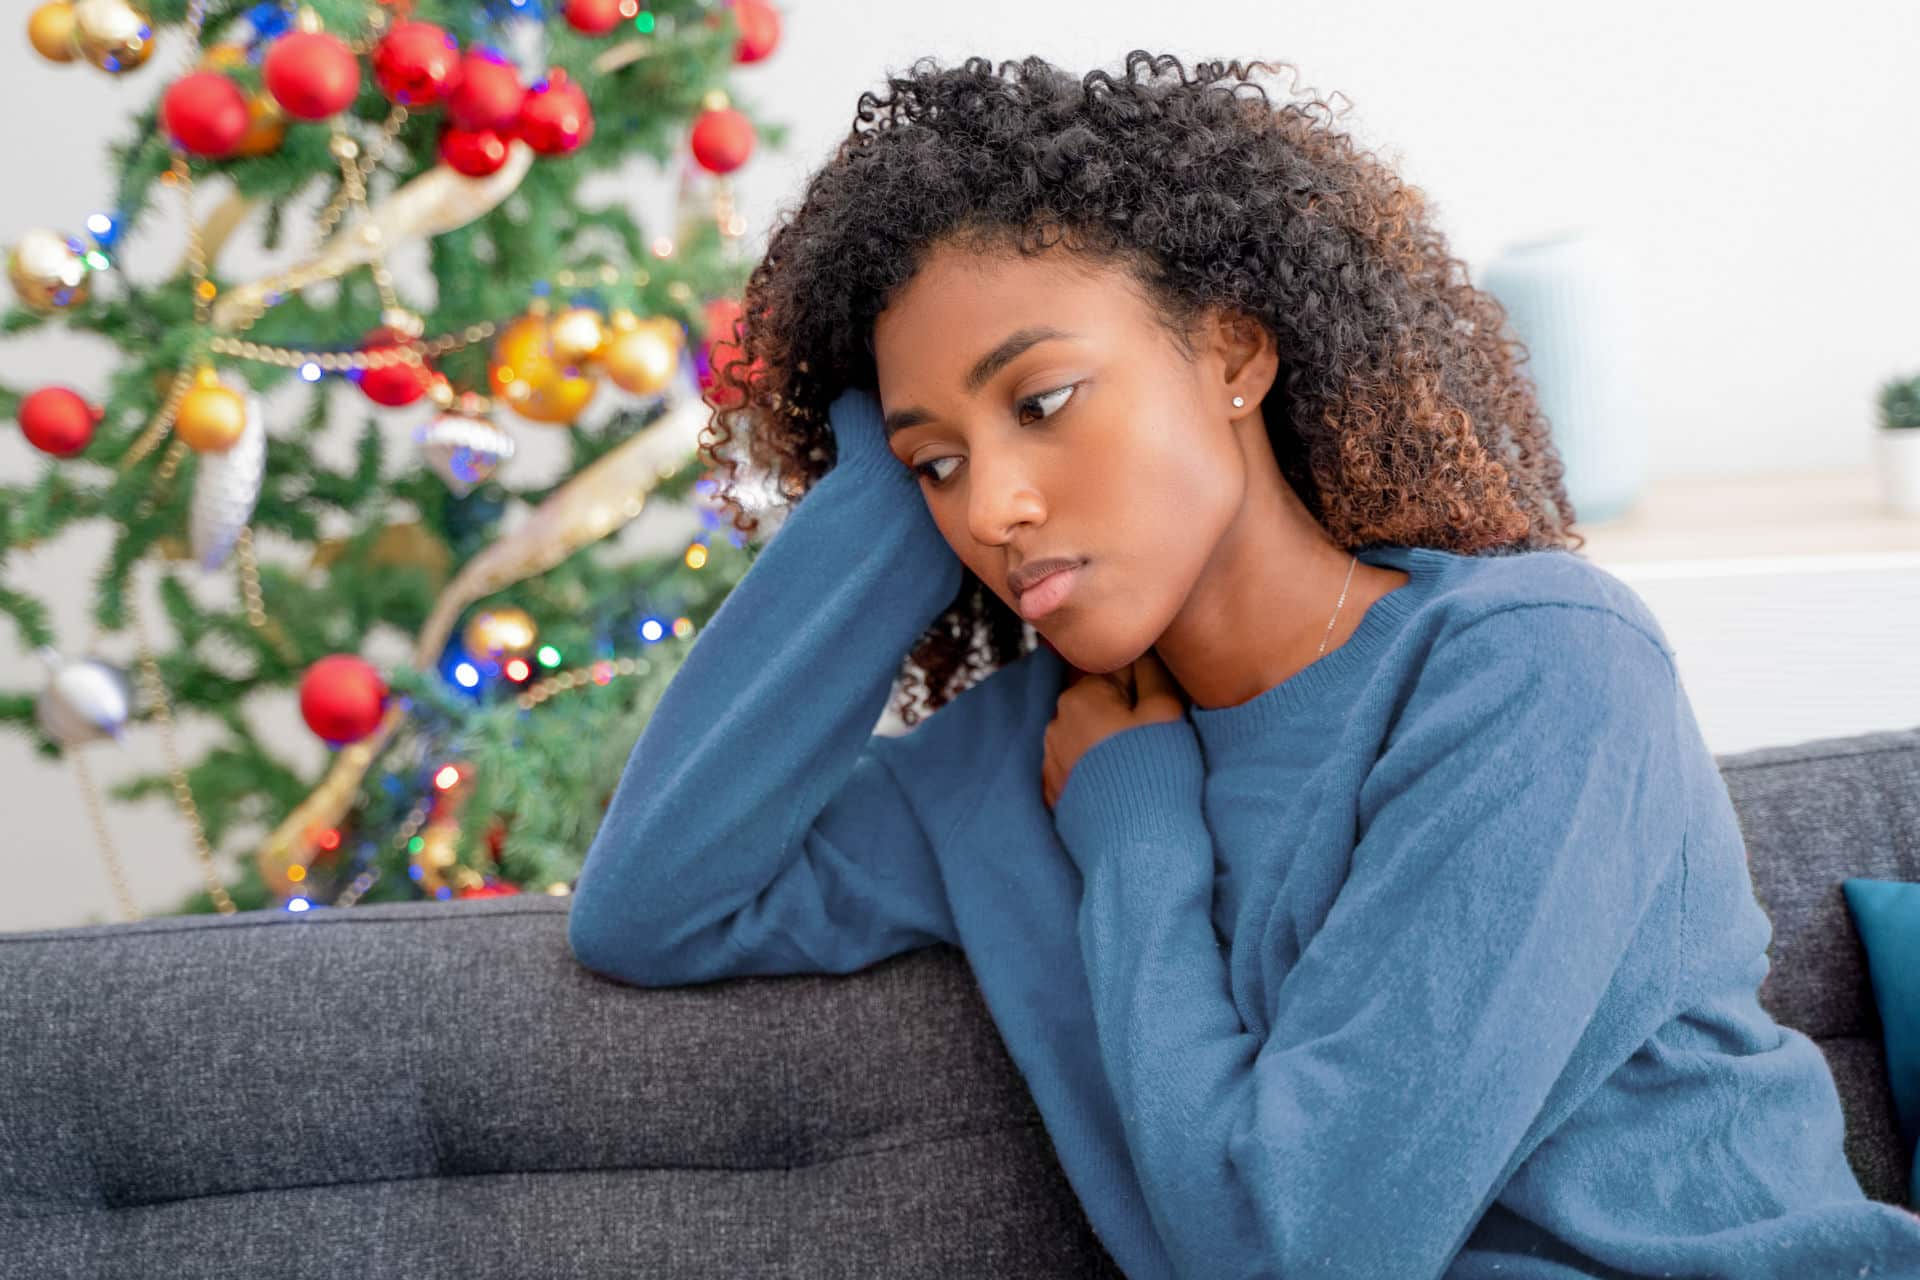 women experiencing post-holiday blues